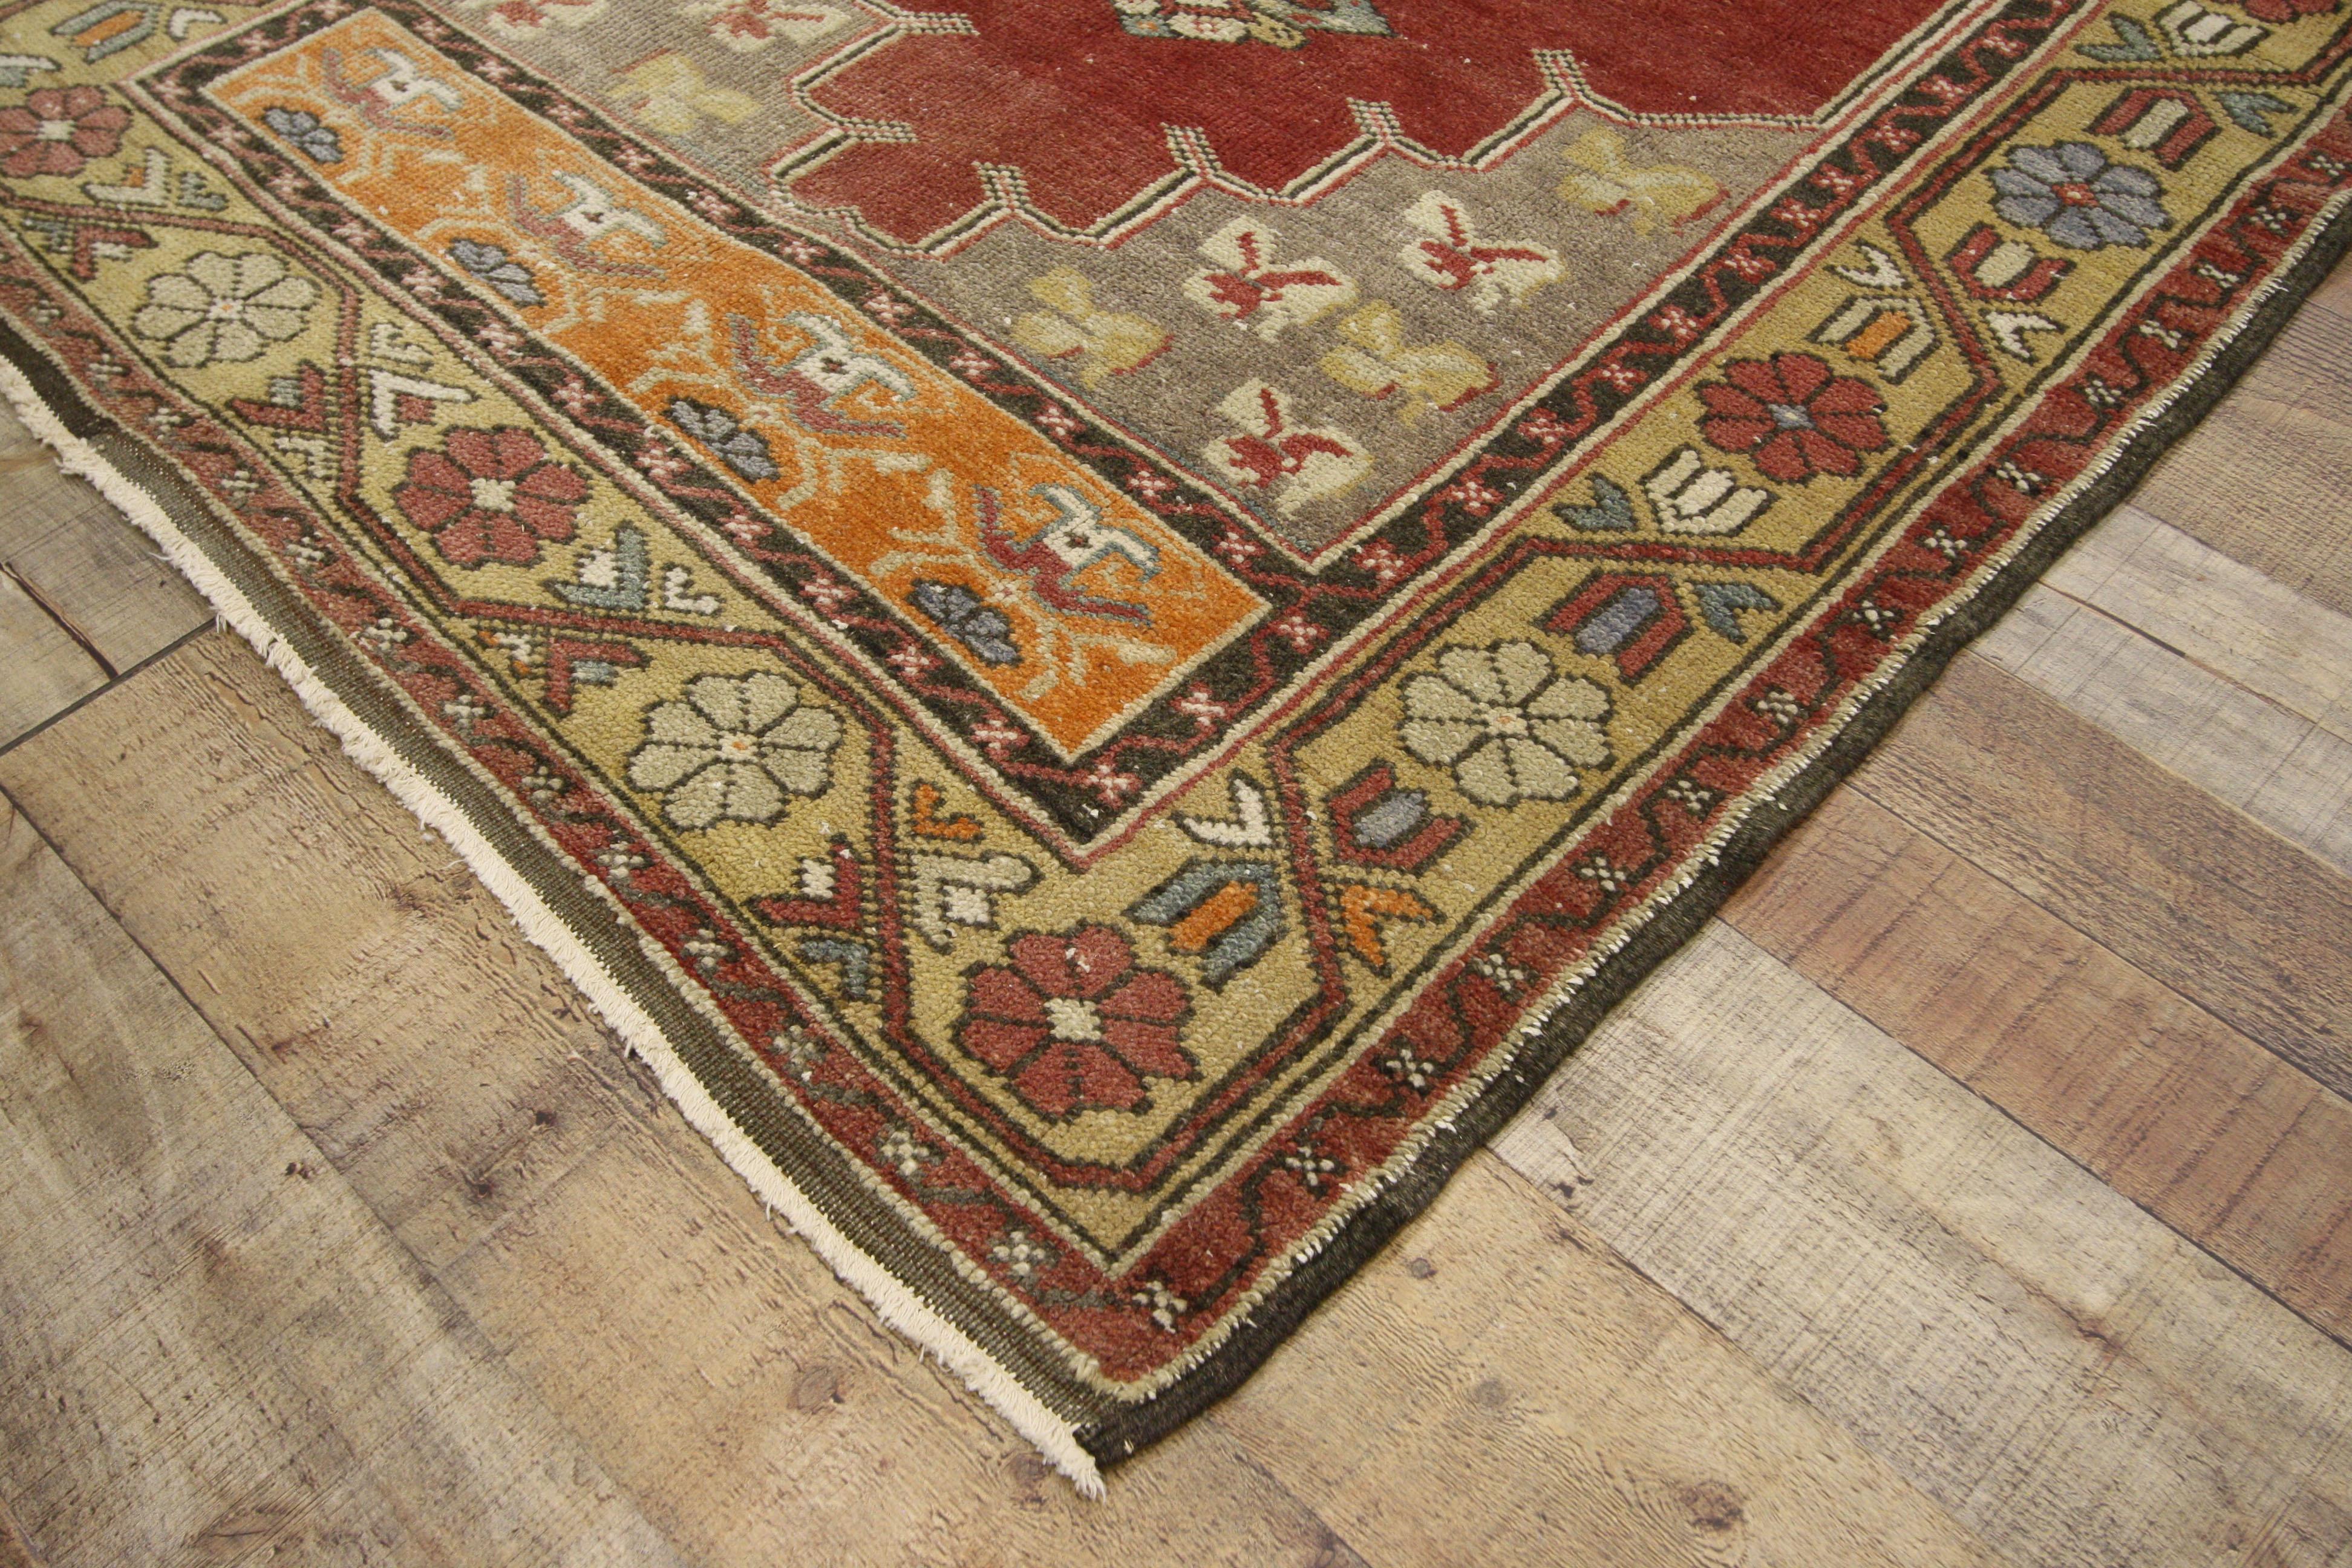 52390, vintage Turkish Oushak Hallway runner with Rustic style. This hand knotted wool vintage Turkish Oushak runner features three connected hexagonal medallions with palmette pendants spread across an abrashed brick red field. Bursting with life,